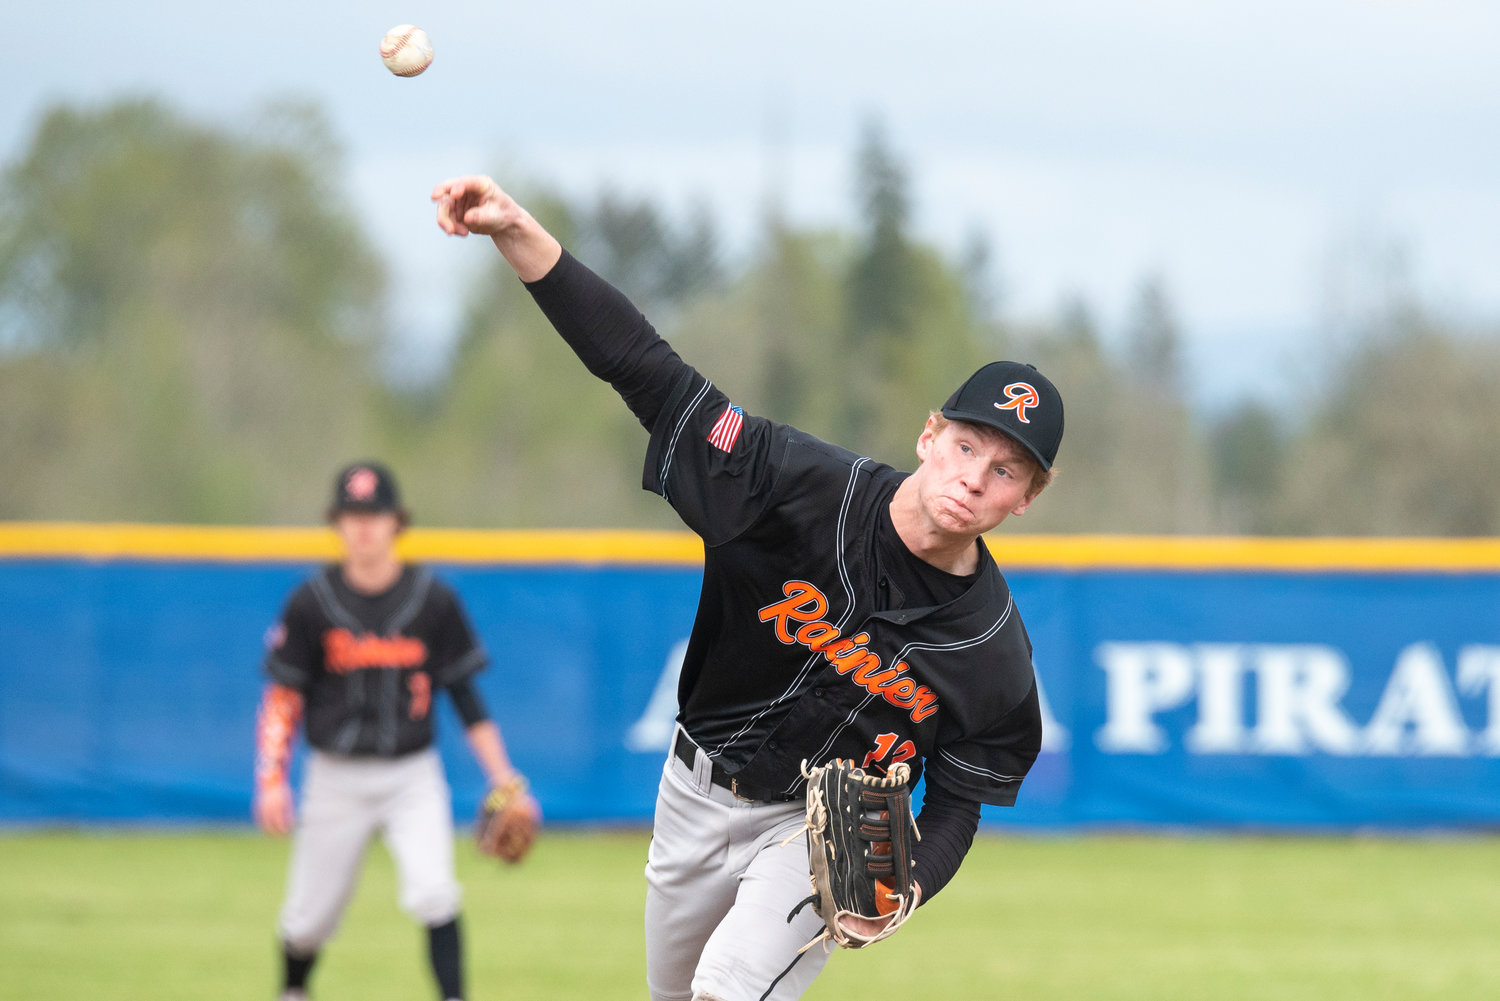 Rainier's John Kenney delivers a pitch to a Wahkiakum batter during a district play-in game at Adna High School on Tuesday, May 3.